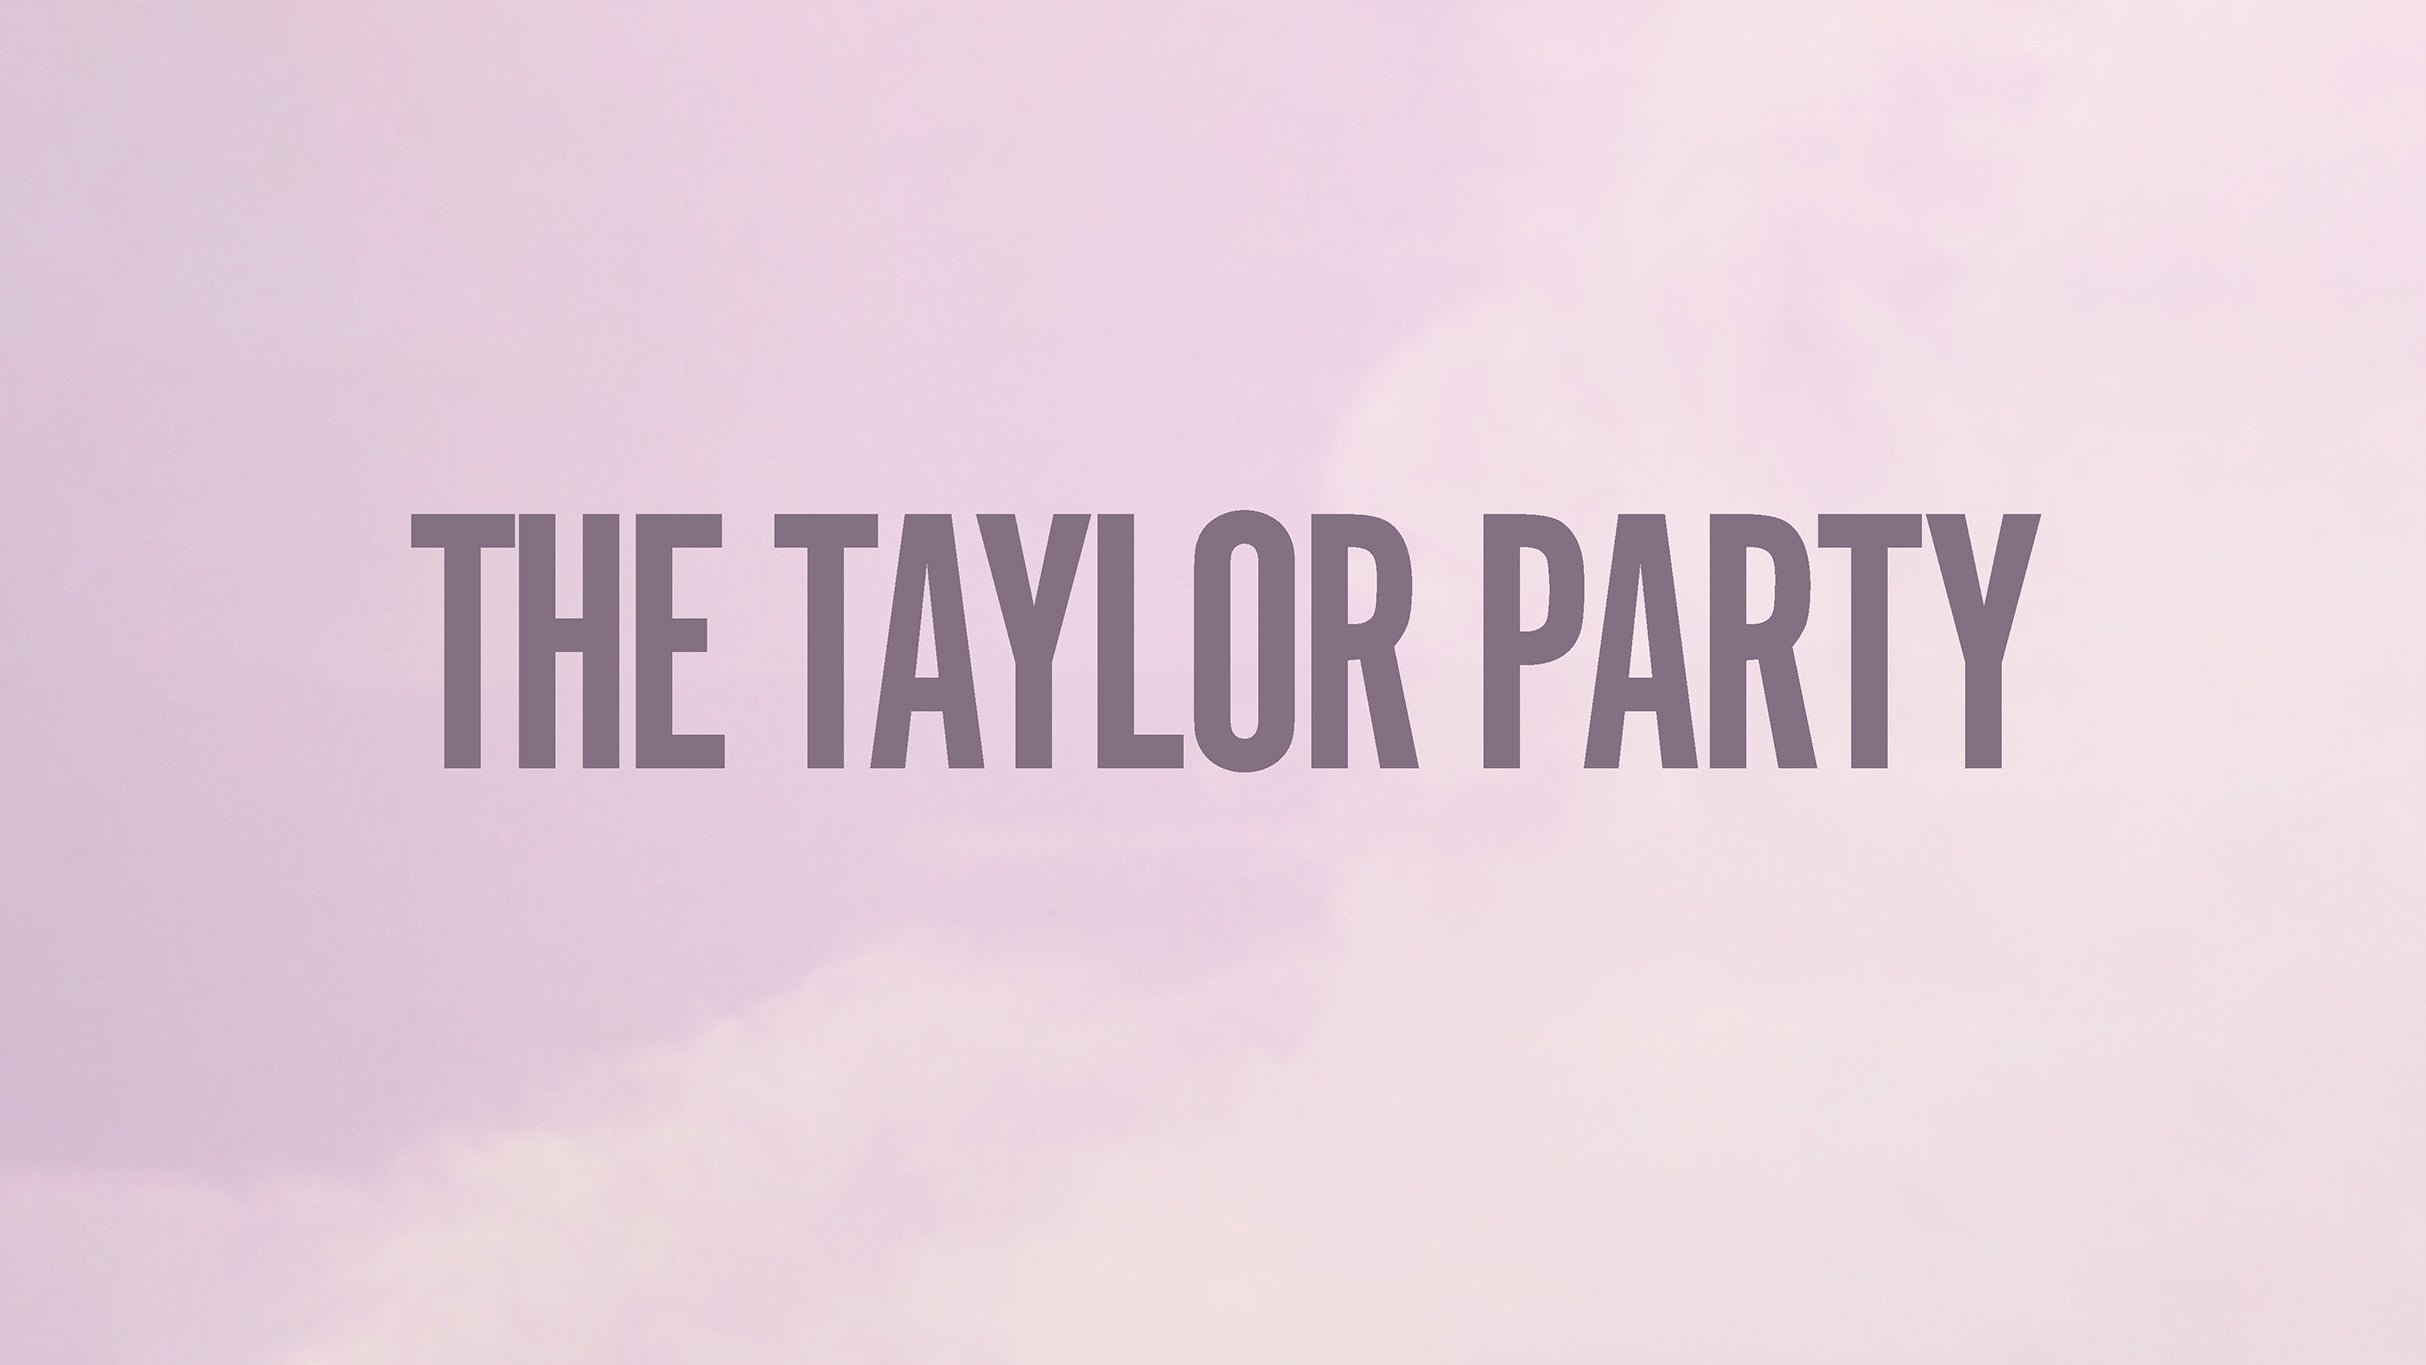 The Taylor Party: The Ts Dance Party - 18+ presale code